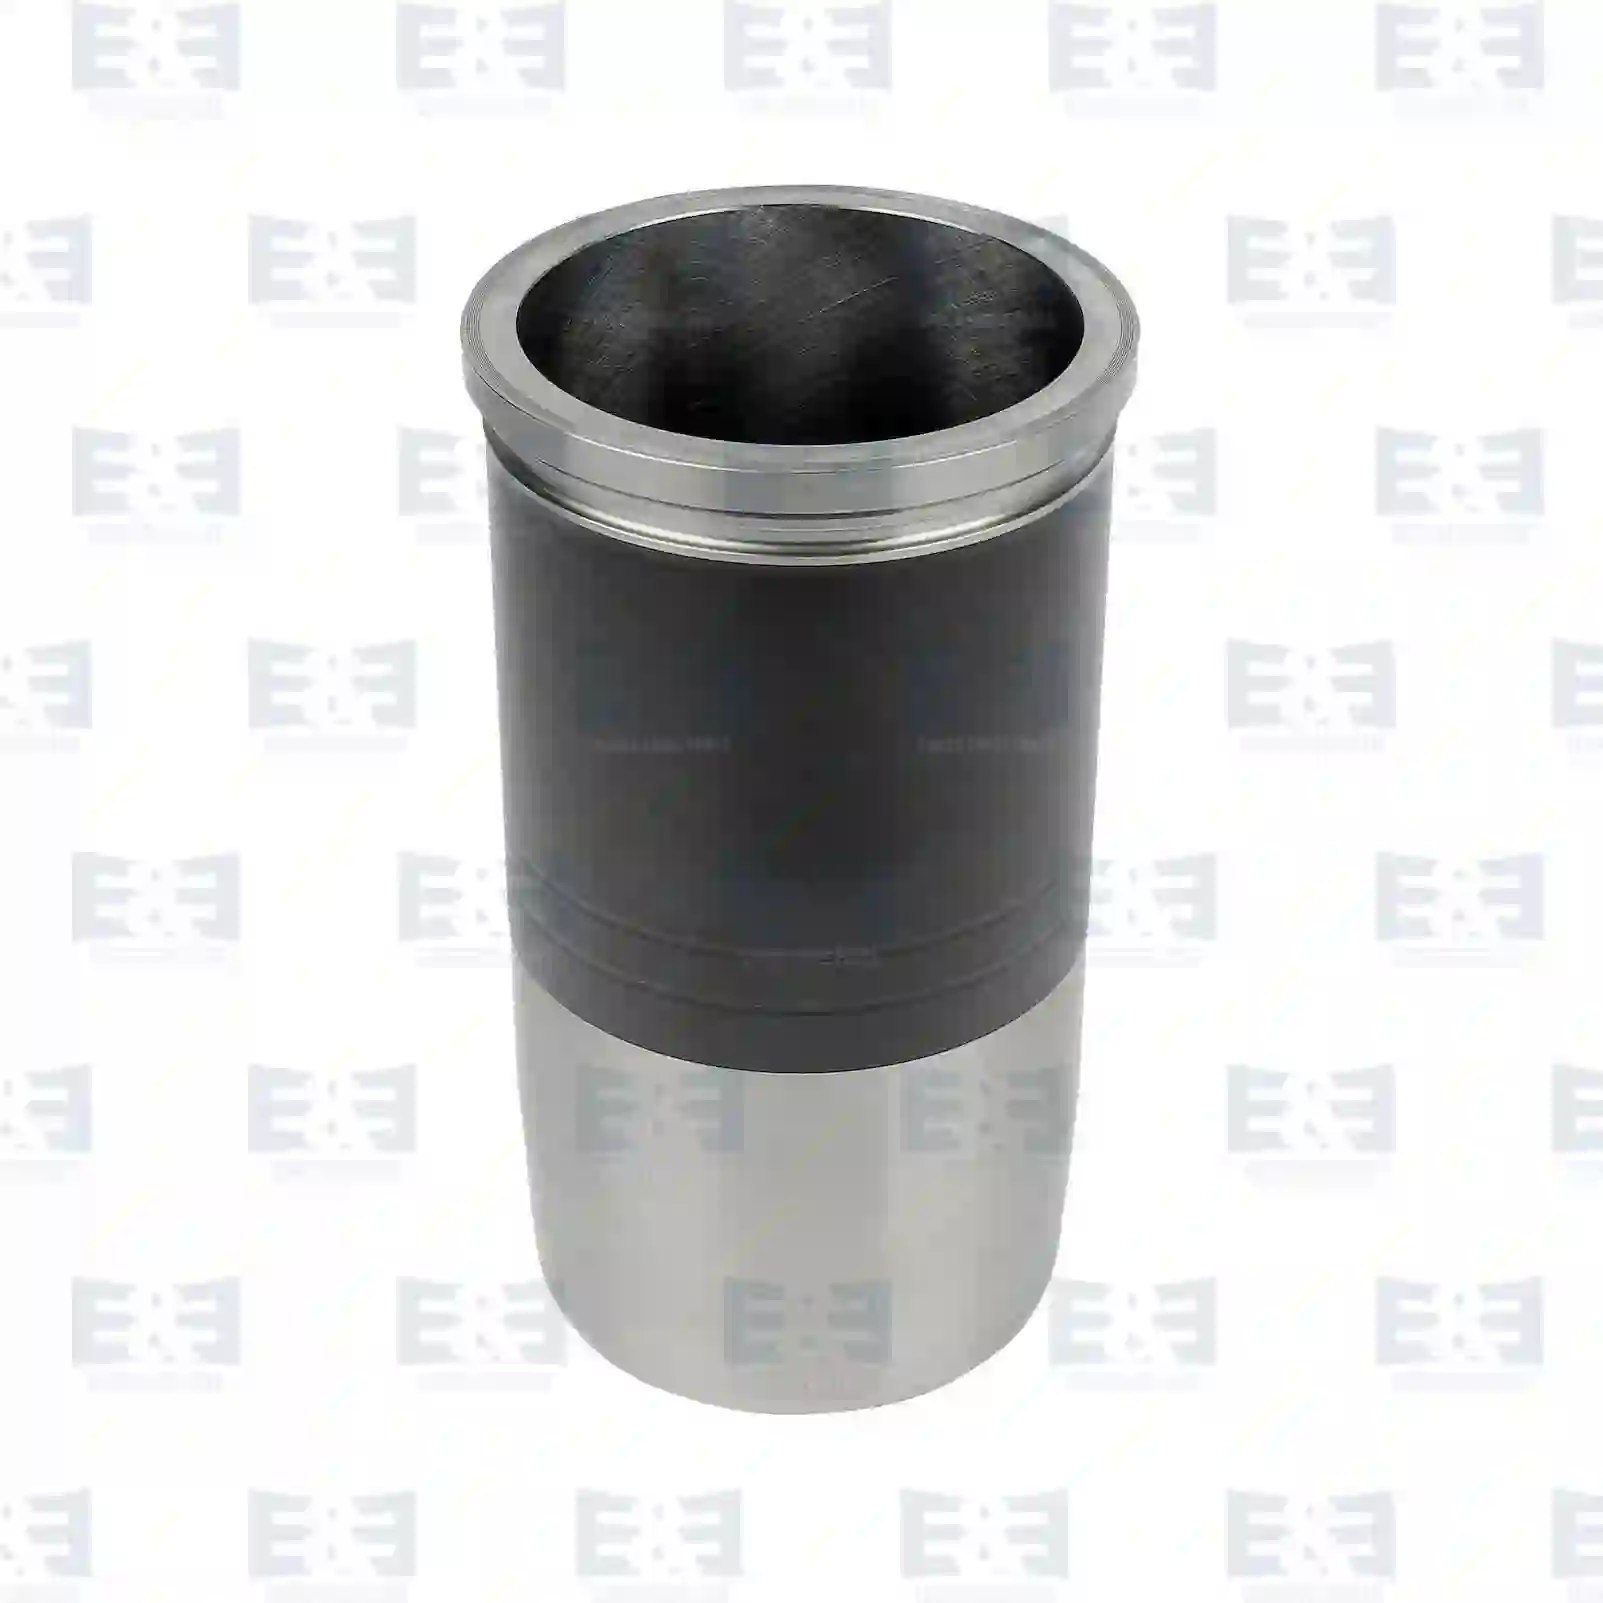 Cylinder liner, without seal rings, 2E2208383, 51012010419, 51012010420, 51012010444, 51012010449 ||  2E2208383 E&E Truck Spare Parts | Truck Spare Parts, Auotomotive Spare Parts Cylinder liner, without seal rings, 2E2208383, 51012010419, 51012010420, 51012010444, 51012010449 ||  2E2208383 E&E Truck Spare Parts | Truck Spare Parts, Auotomotive Spare Parts